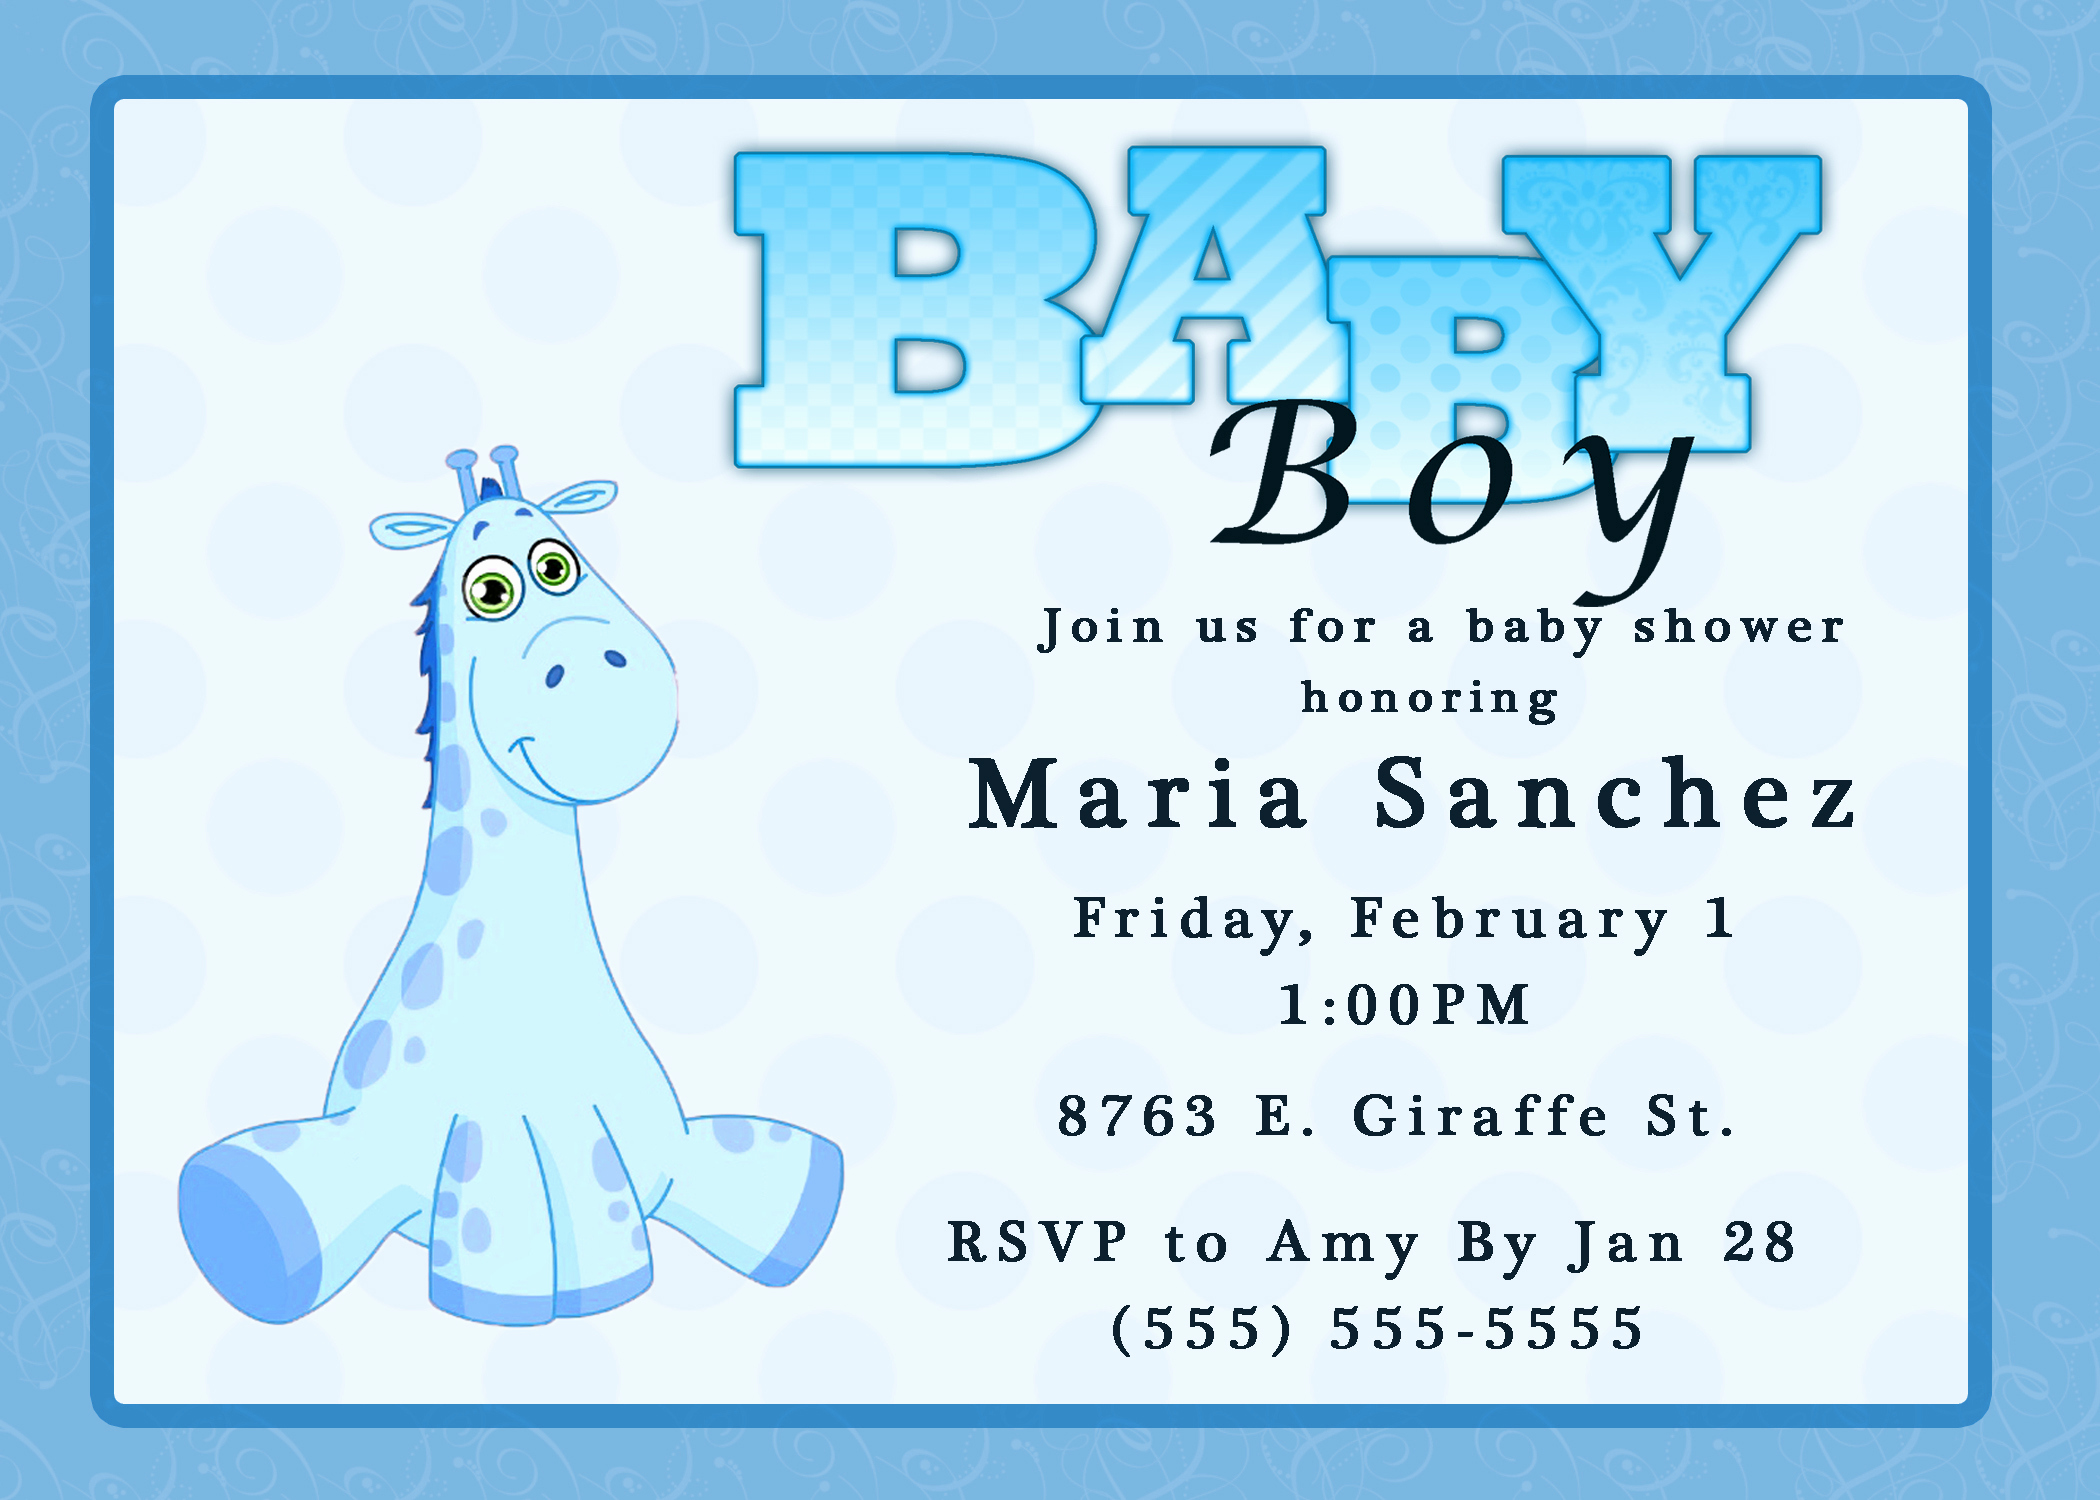 Baby Shower Invitation Images Best Of Baby Shower Invitations